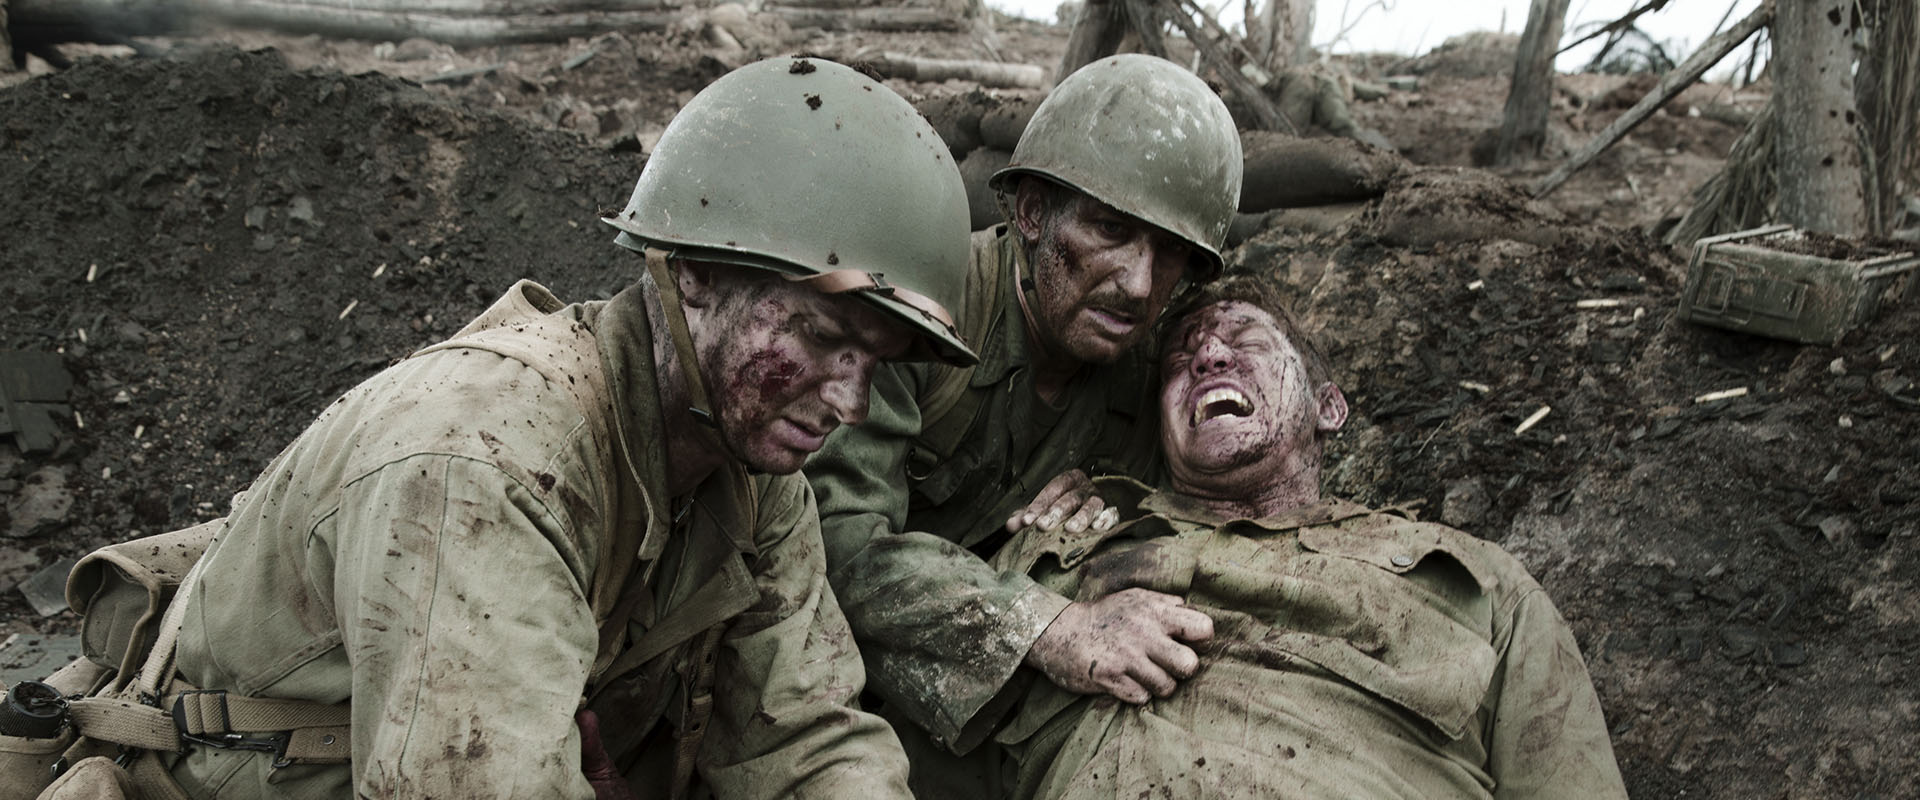 desmond doss dragged 75 men to safety during the ferocious battle